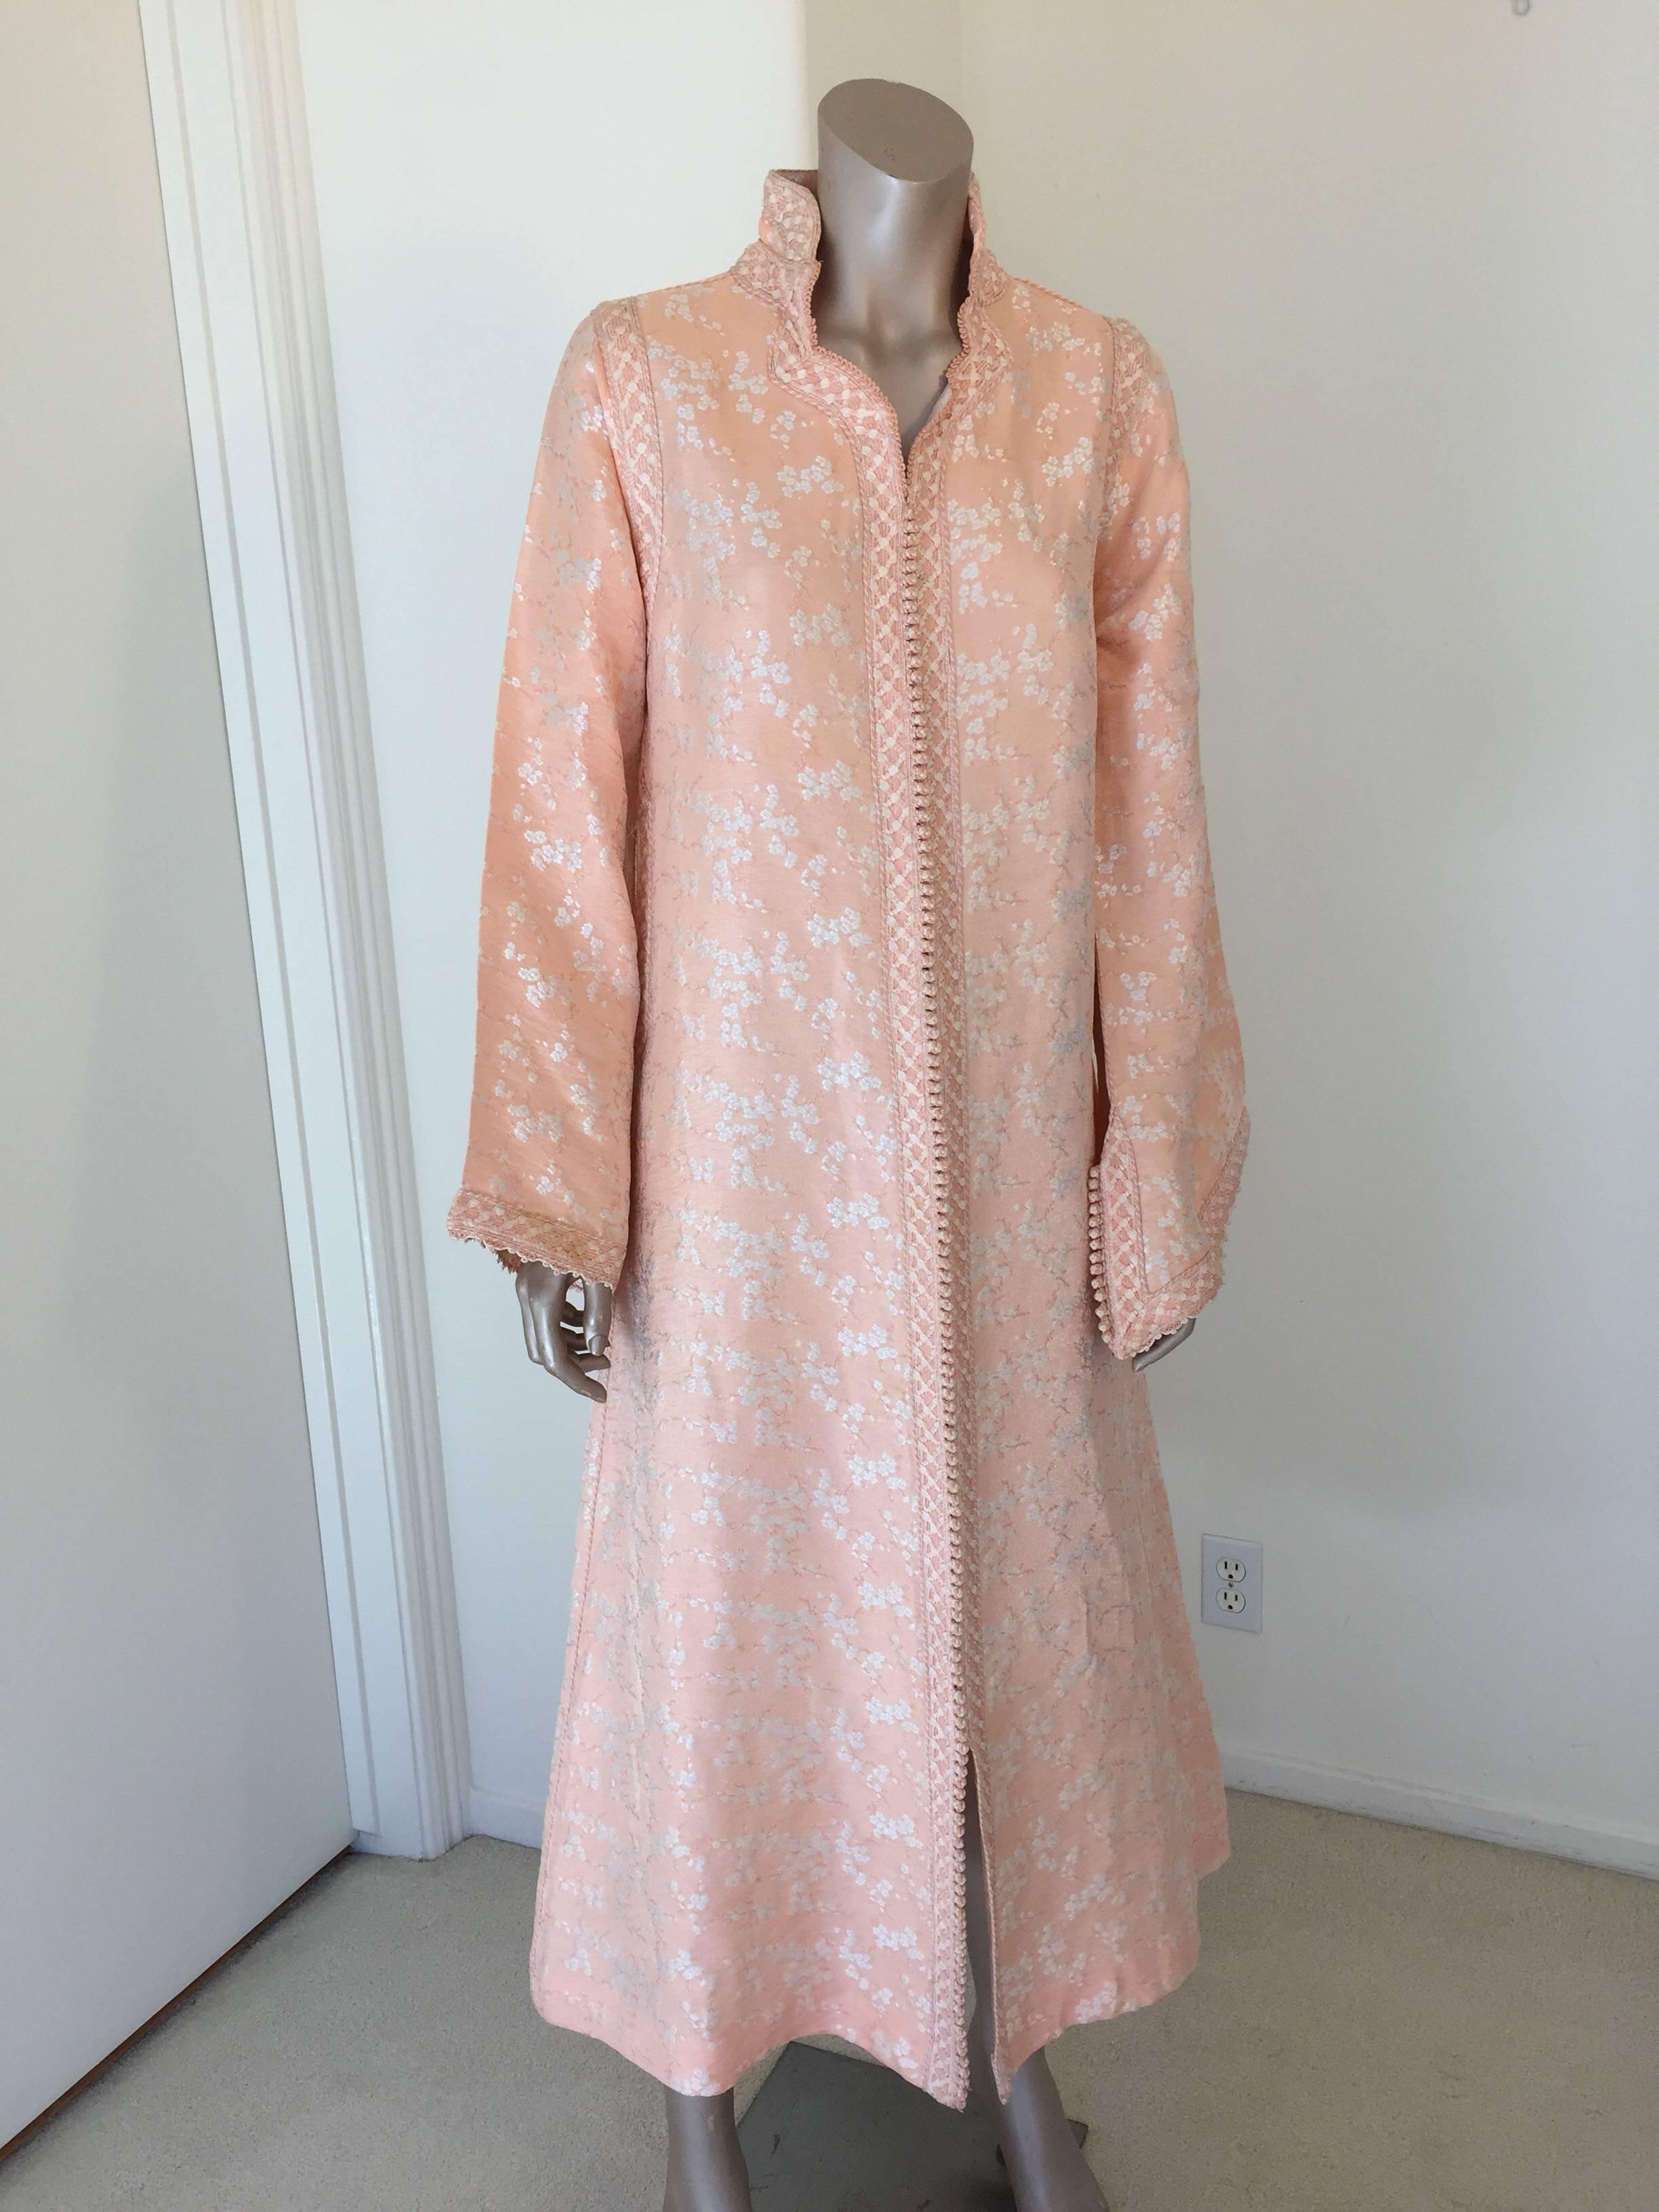 Vintage Moroccan caftan in peach brocade.
Maxi dress kaftan handmade by Moroccan artist designer.
Handcrafted vintage exotic 1970s ceremonial caftan gown from North Africa, Morocco.
This maxi dress caftan is made in a subtle metallic brocade with